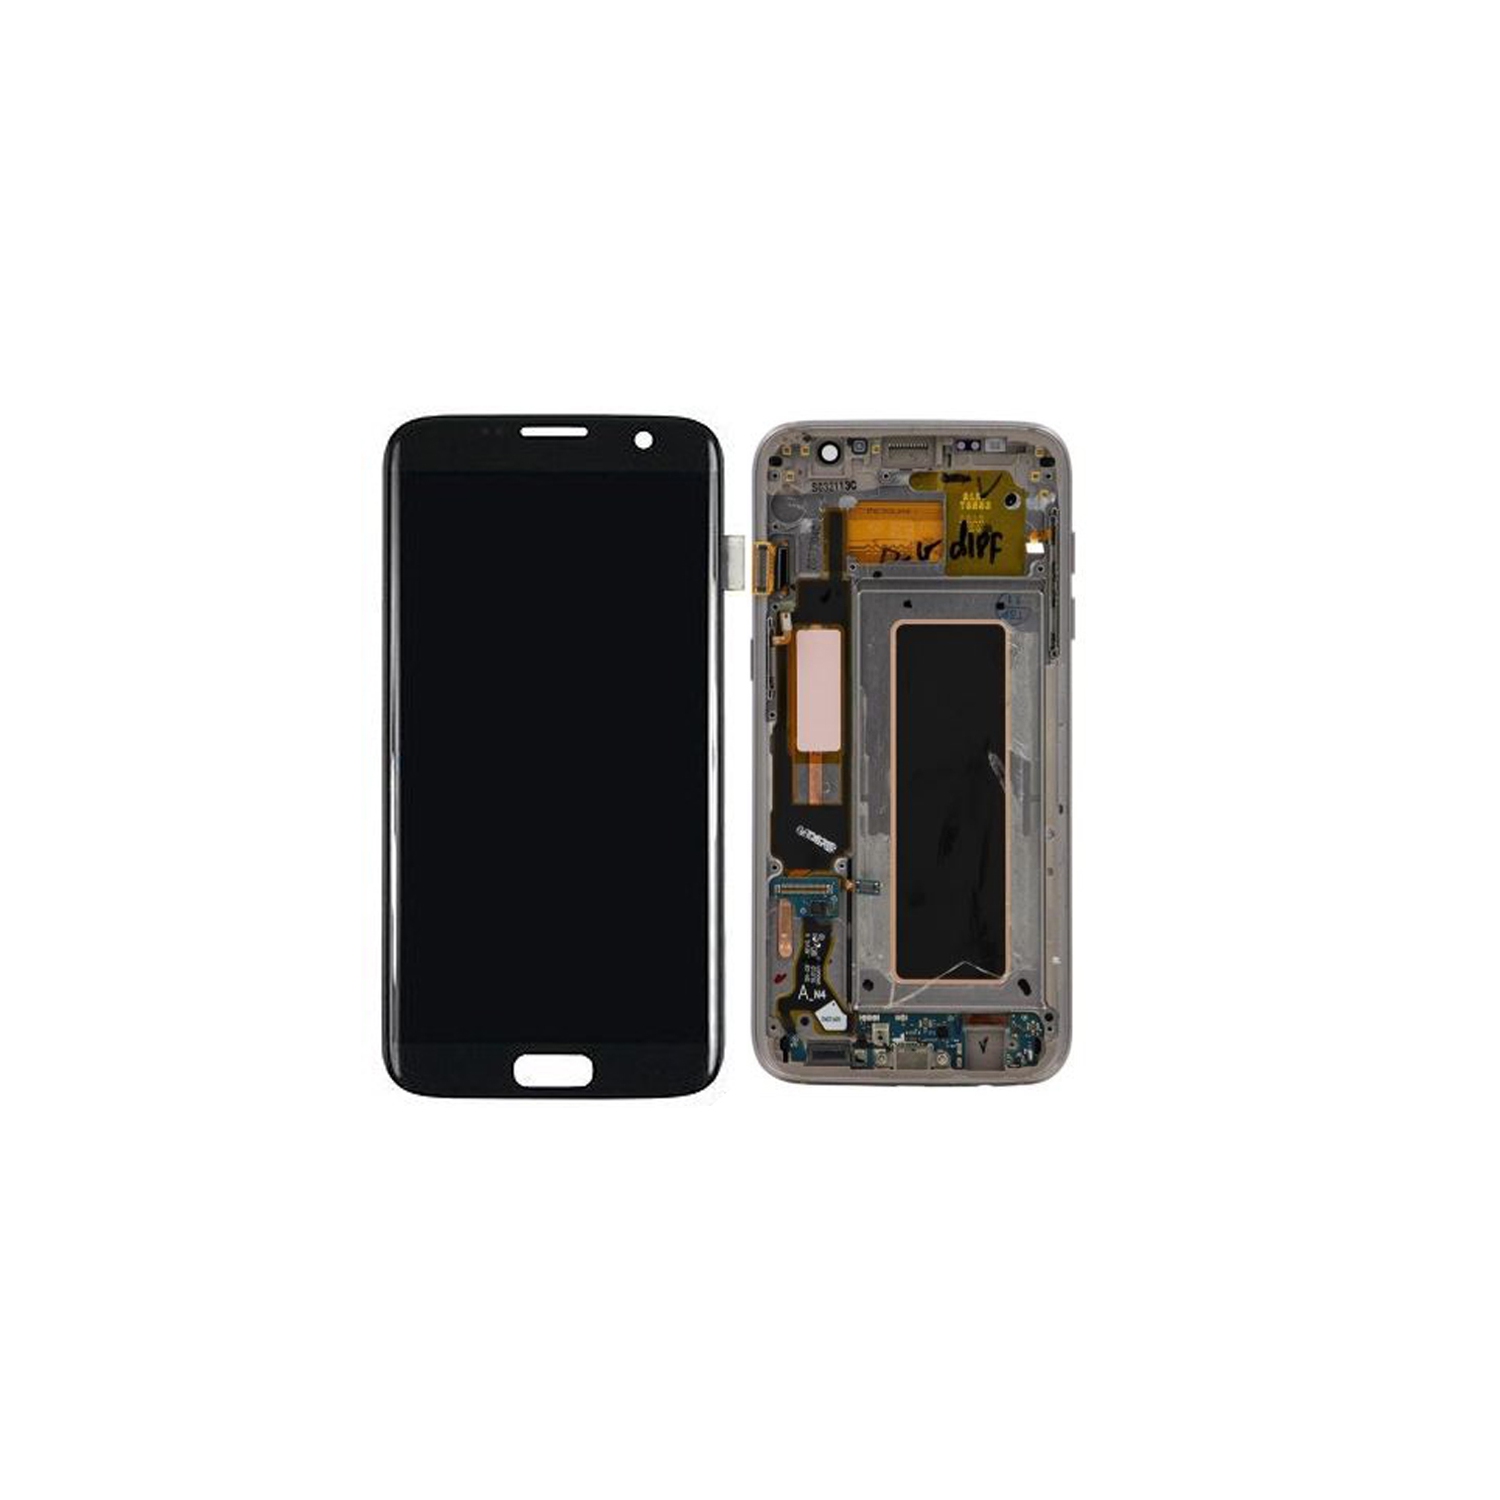 Samsung Galaxy S7 Edge G935W8 LCD Digitizer Assembly Replacement With Frame - Black